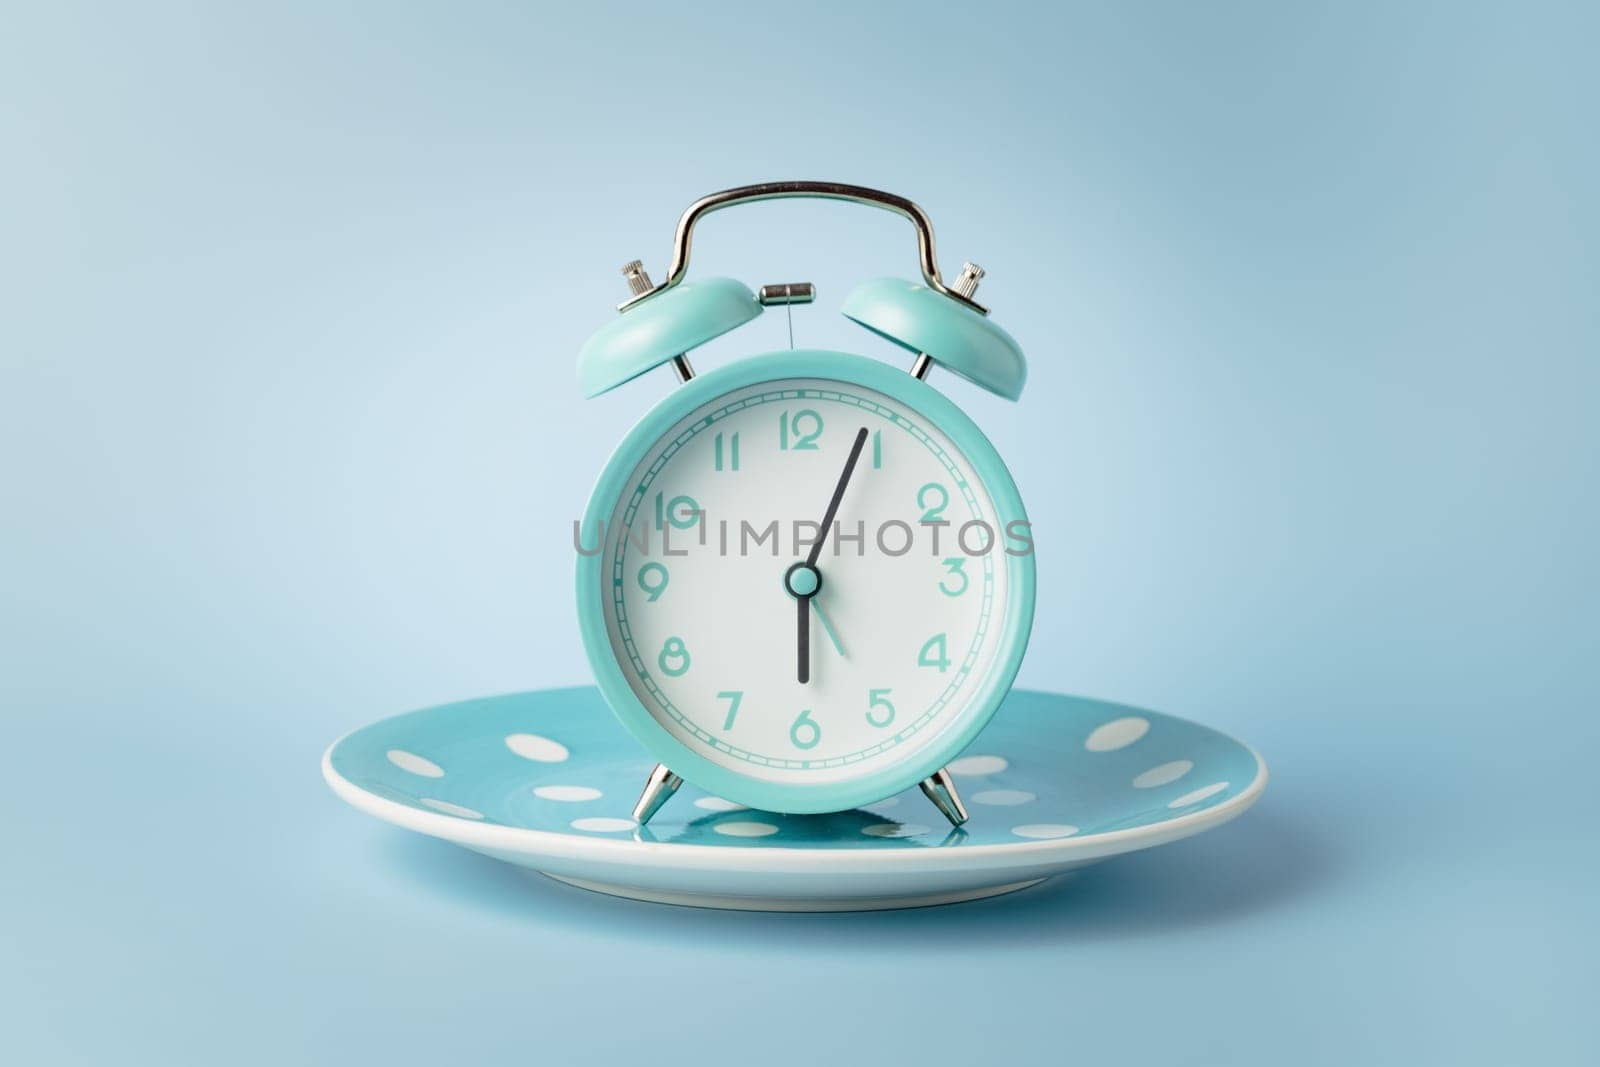 An alarm clock on an empty plate against blue background for the concept of food, time management, losing weight and eating on time.